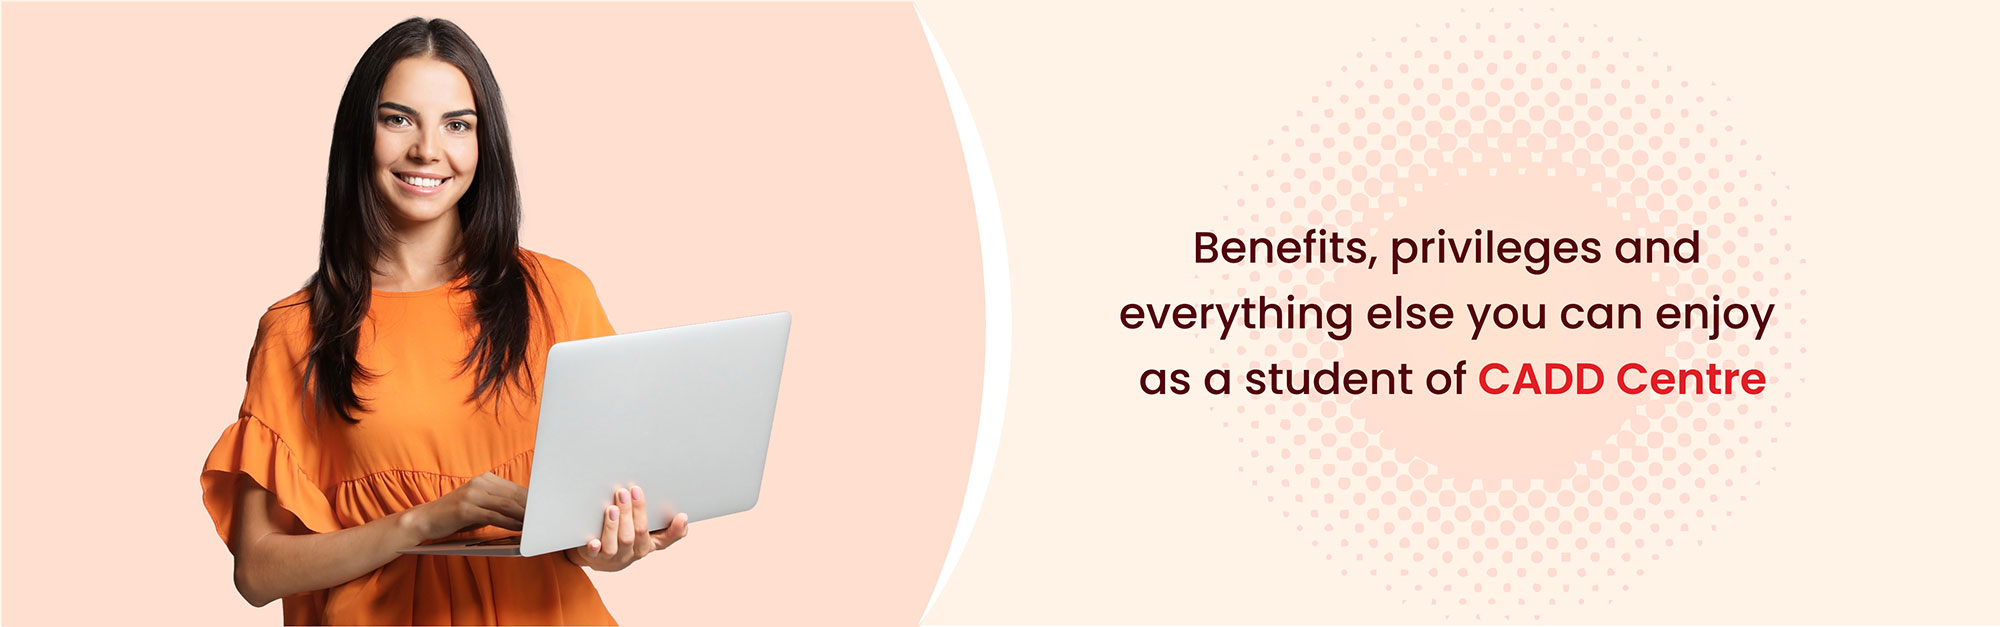 Benefits & privileges of a CADD Centre Student